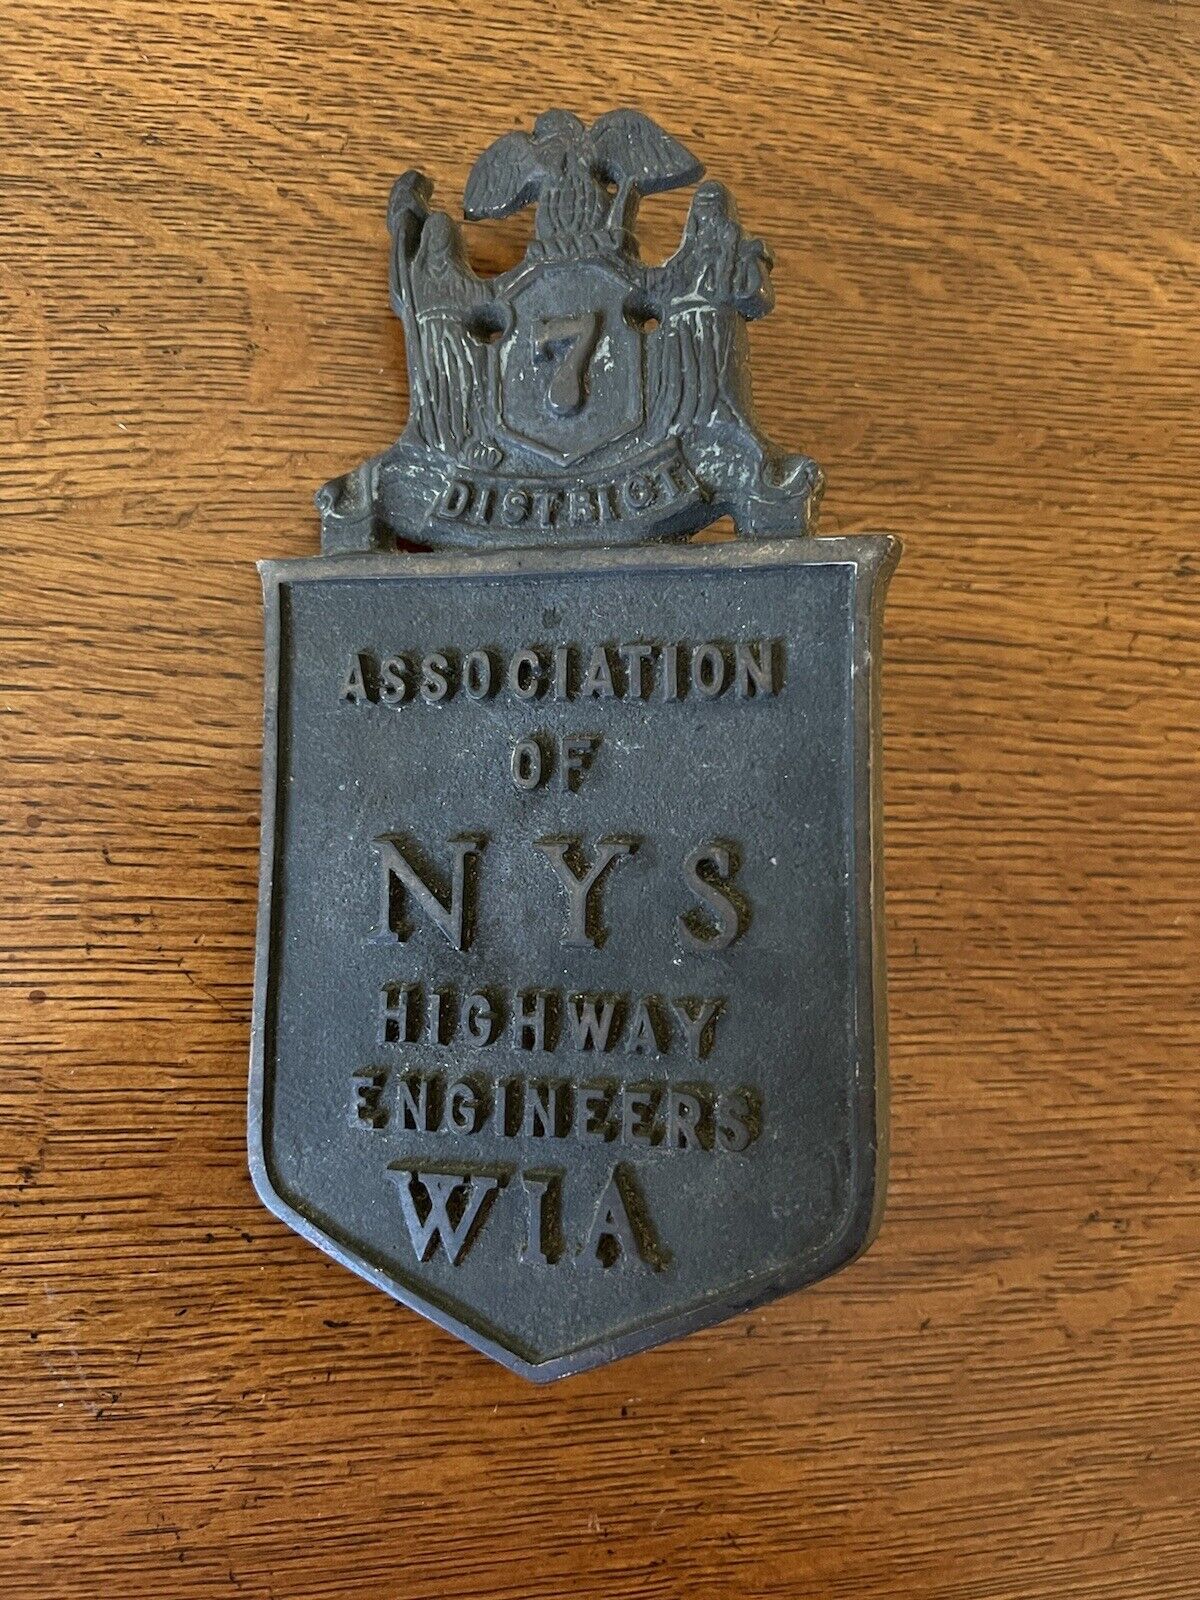 Antique Cast Bronze Plaque New York State Highway Engineers Dis 7  Road Sign WIA